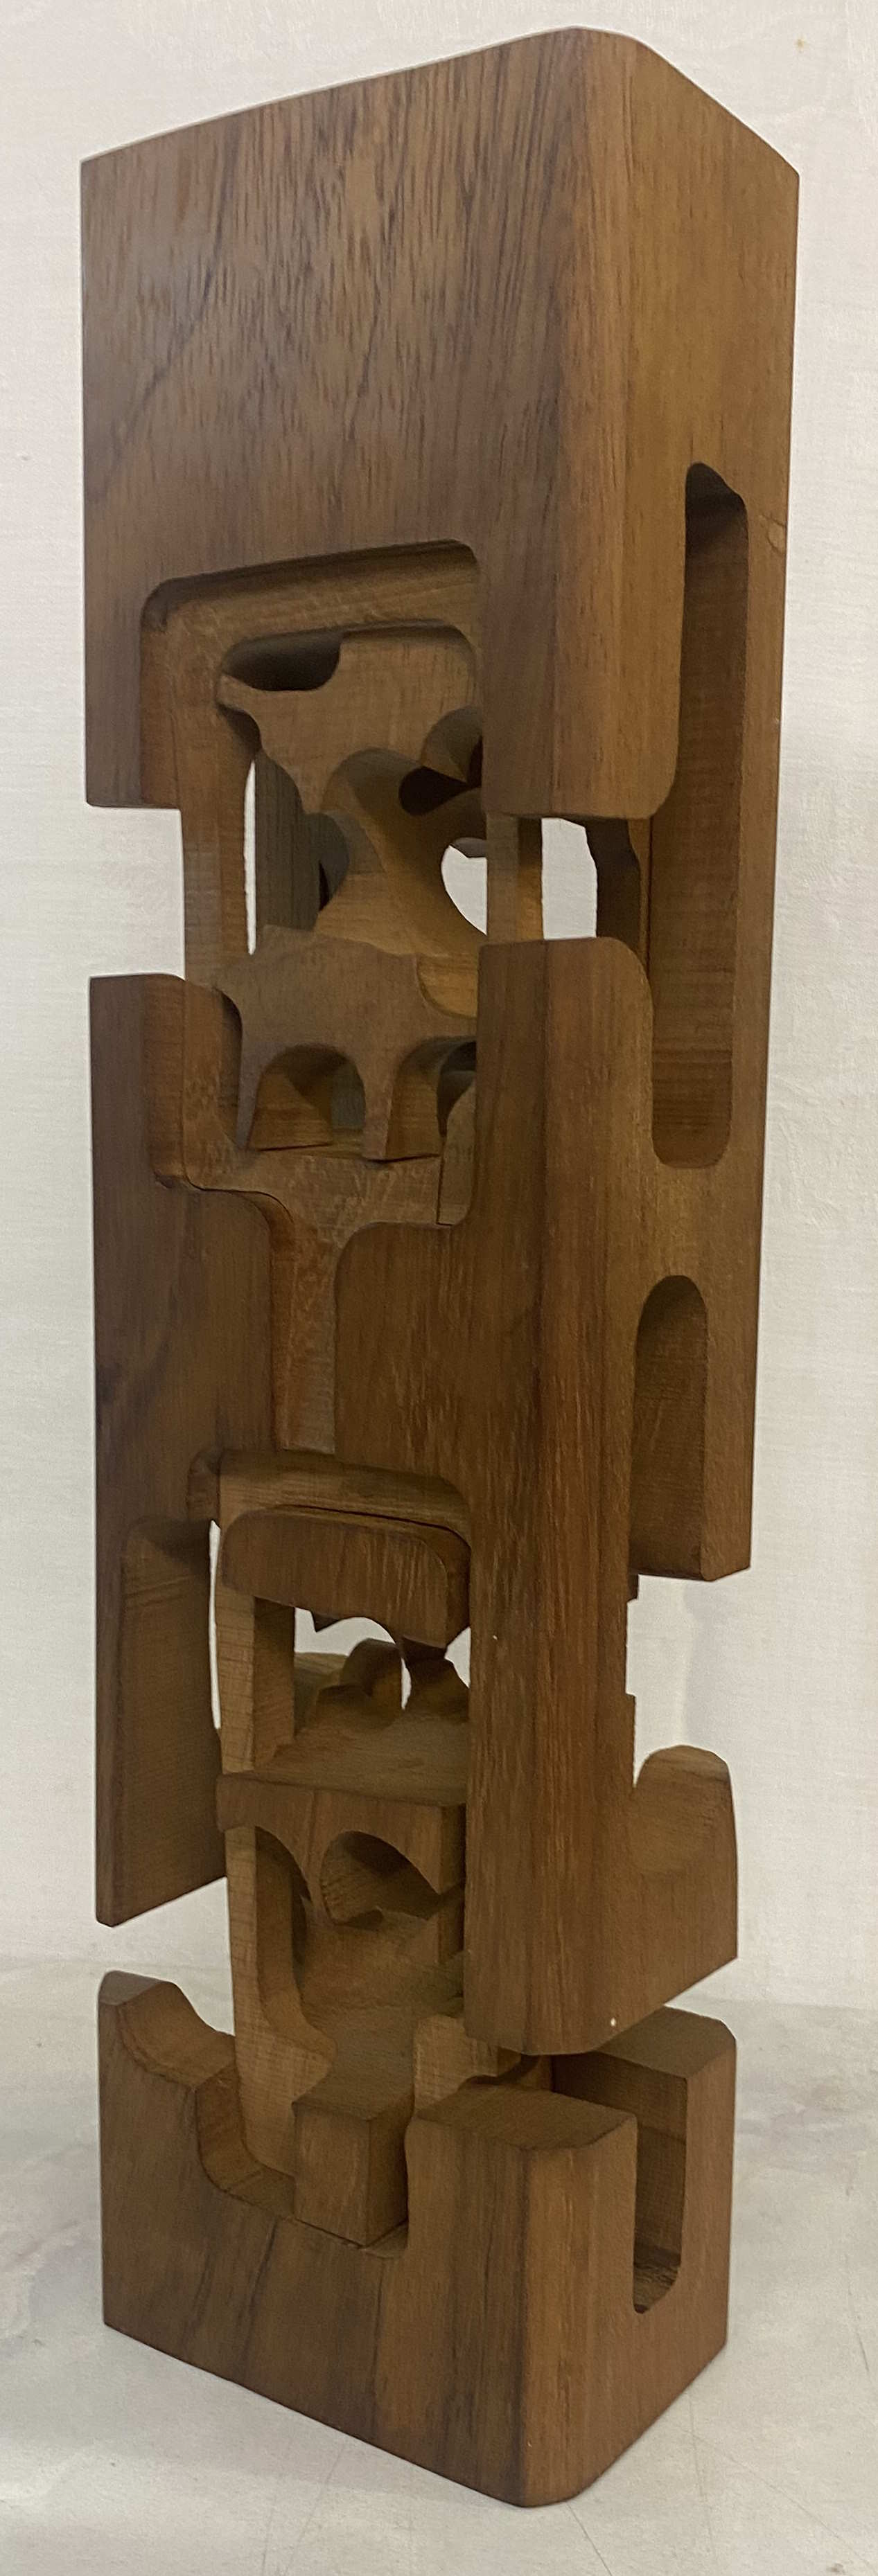 An abstract wooden sculpture attributed to Brian Willsher